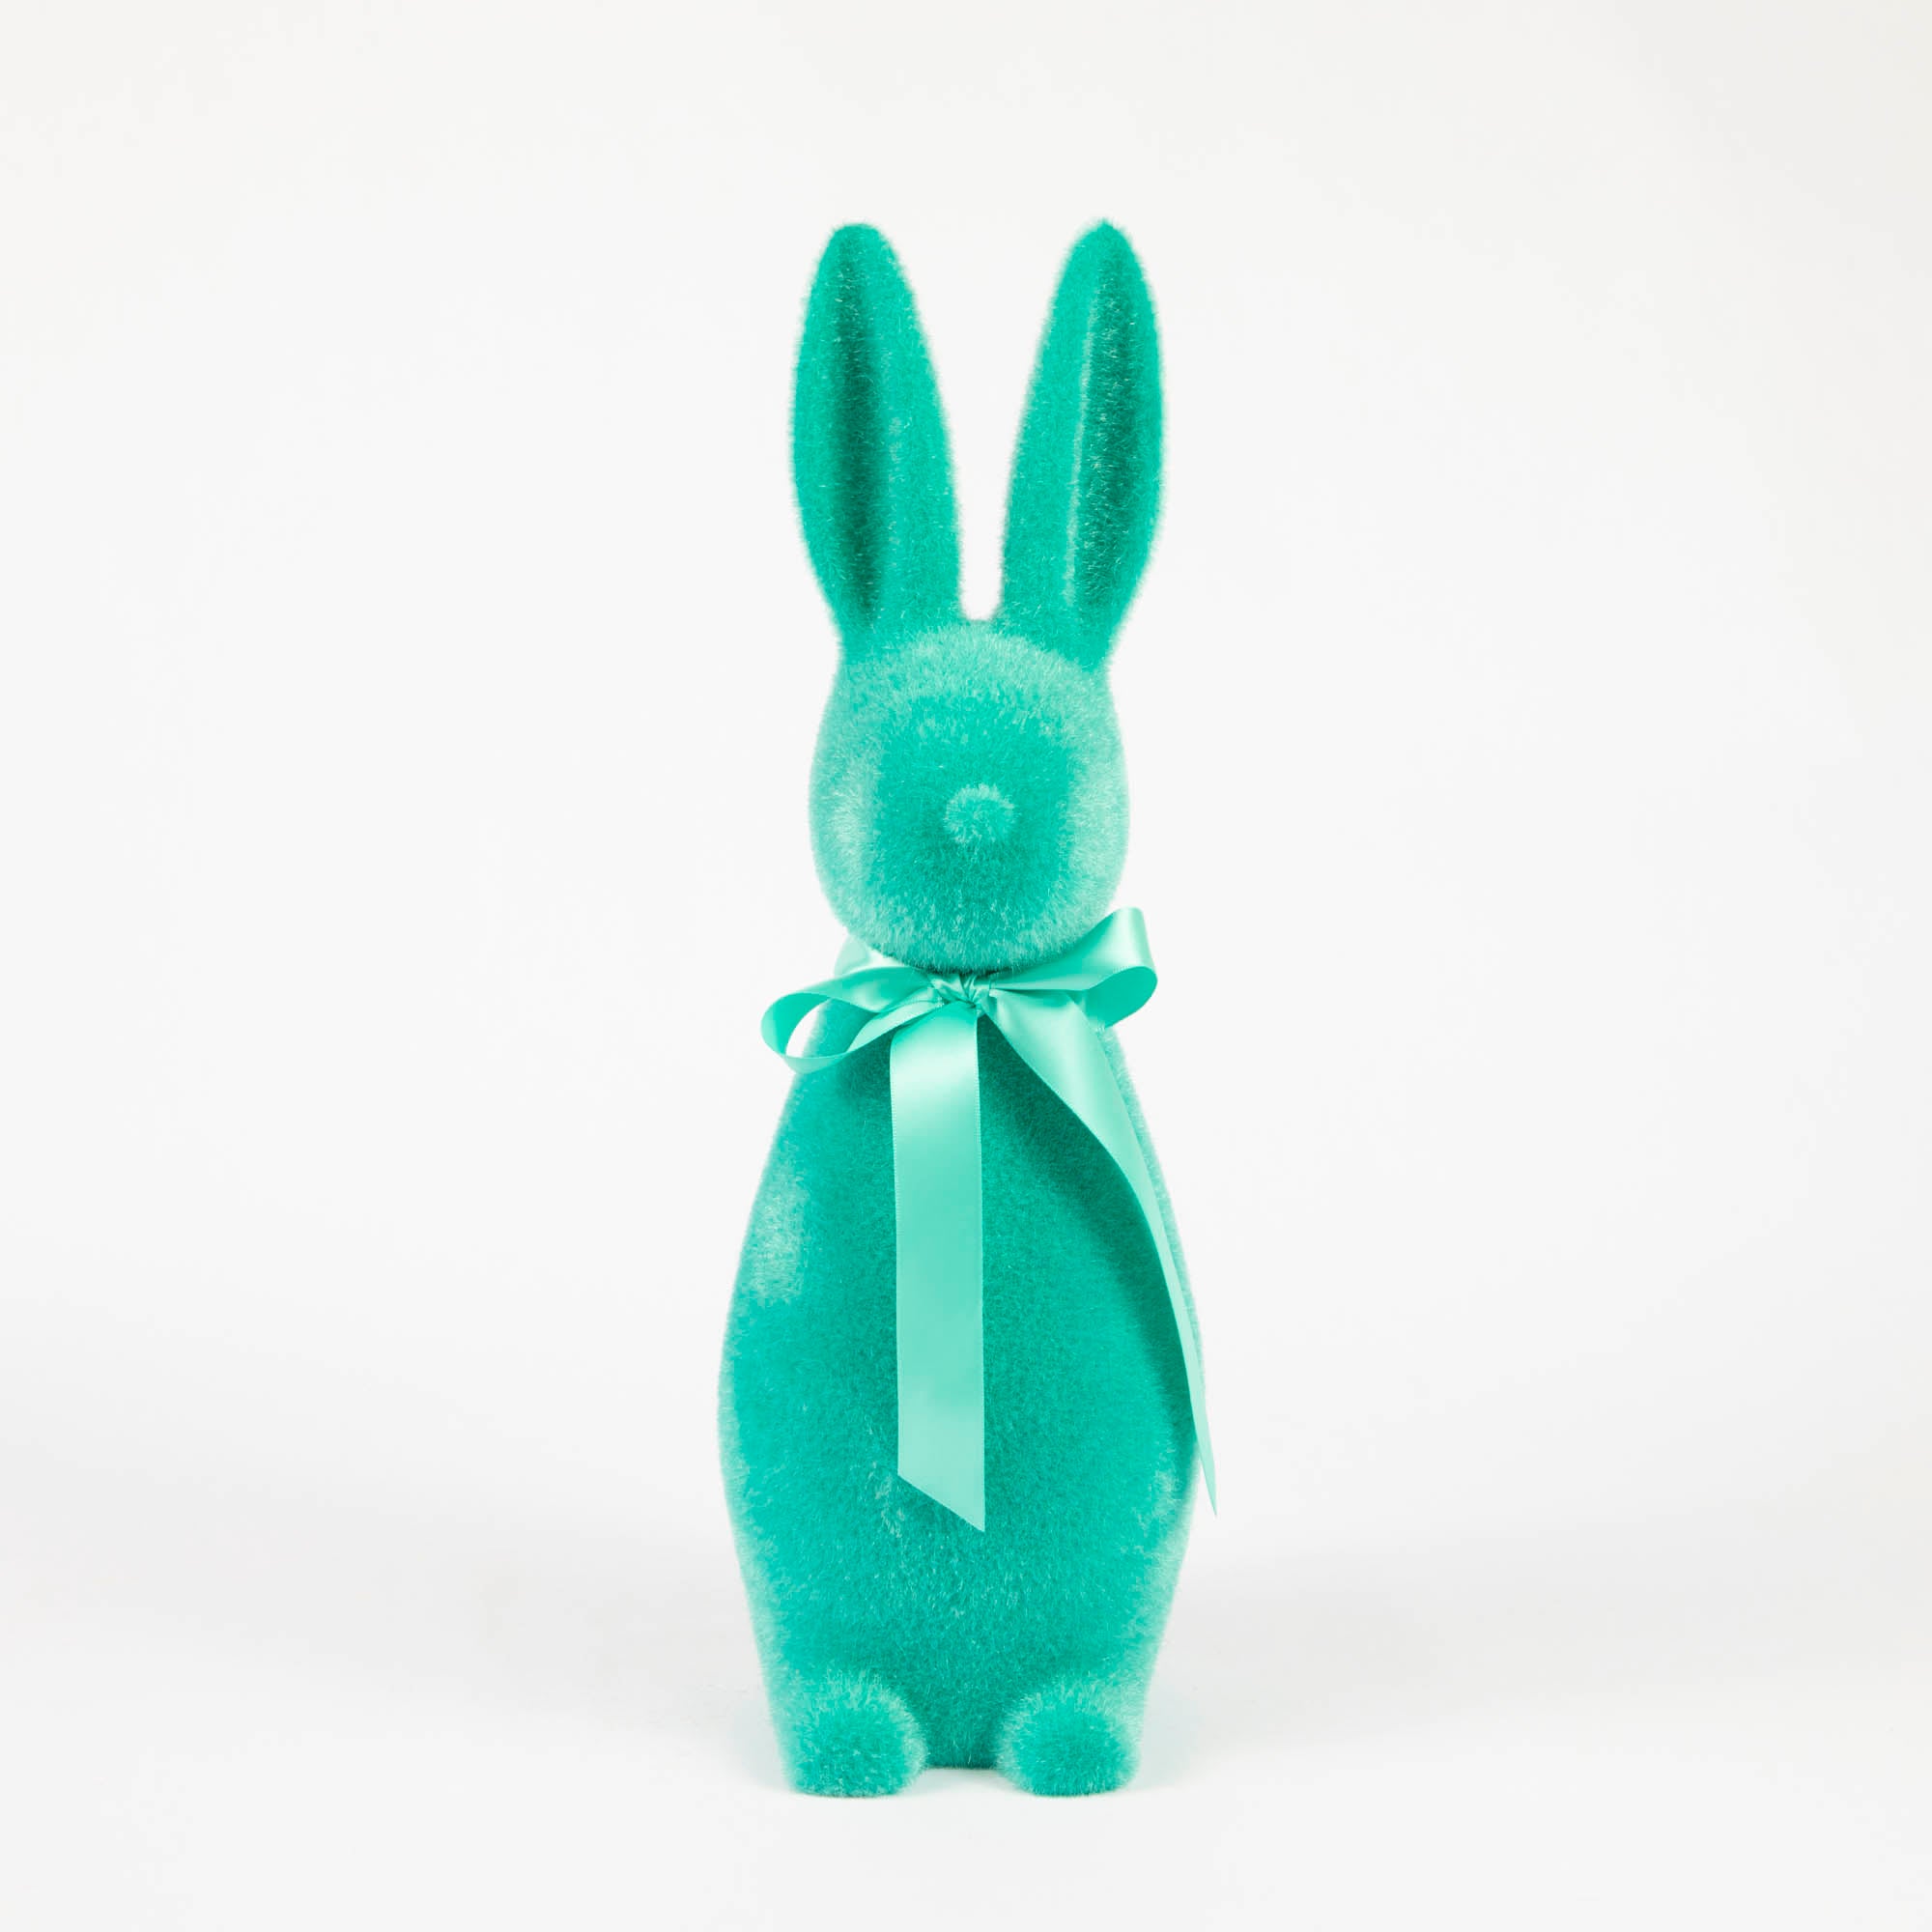 A Medium Flocked Button Nose Bunny by Glitterville, with a bow on a white background, perfect for an Easter celebration.